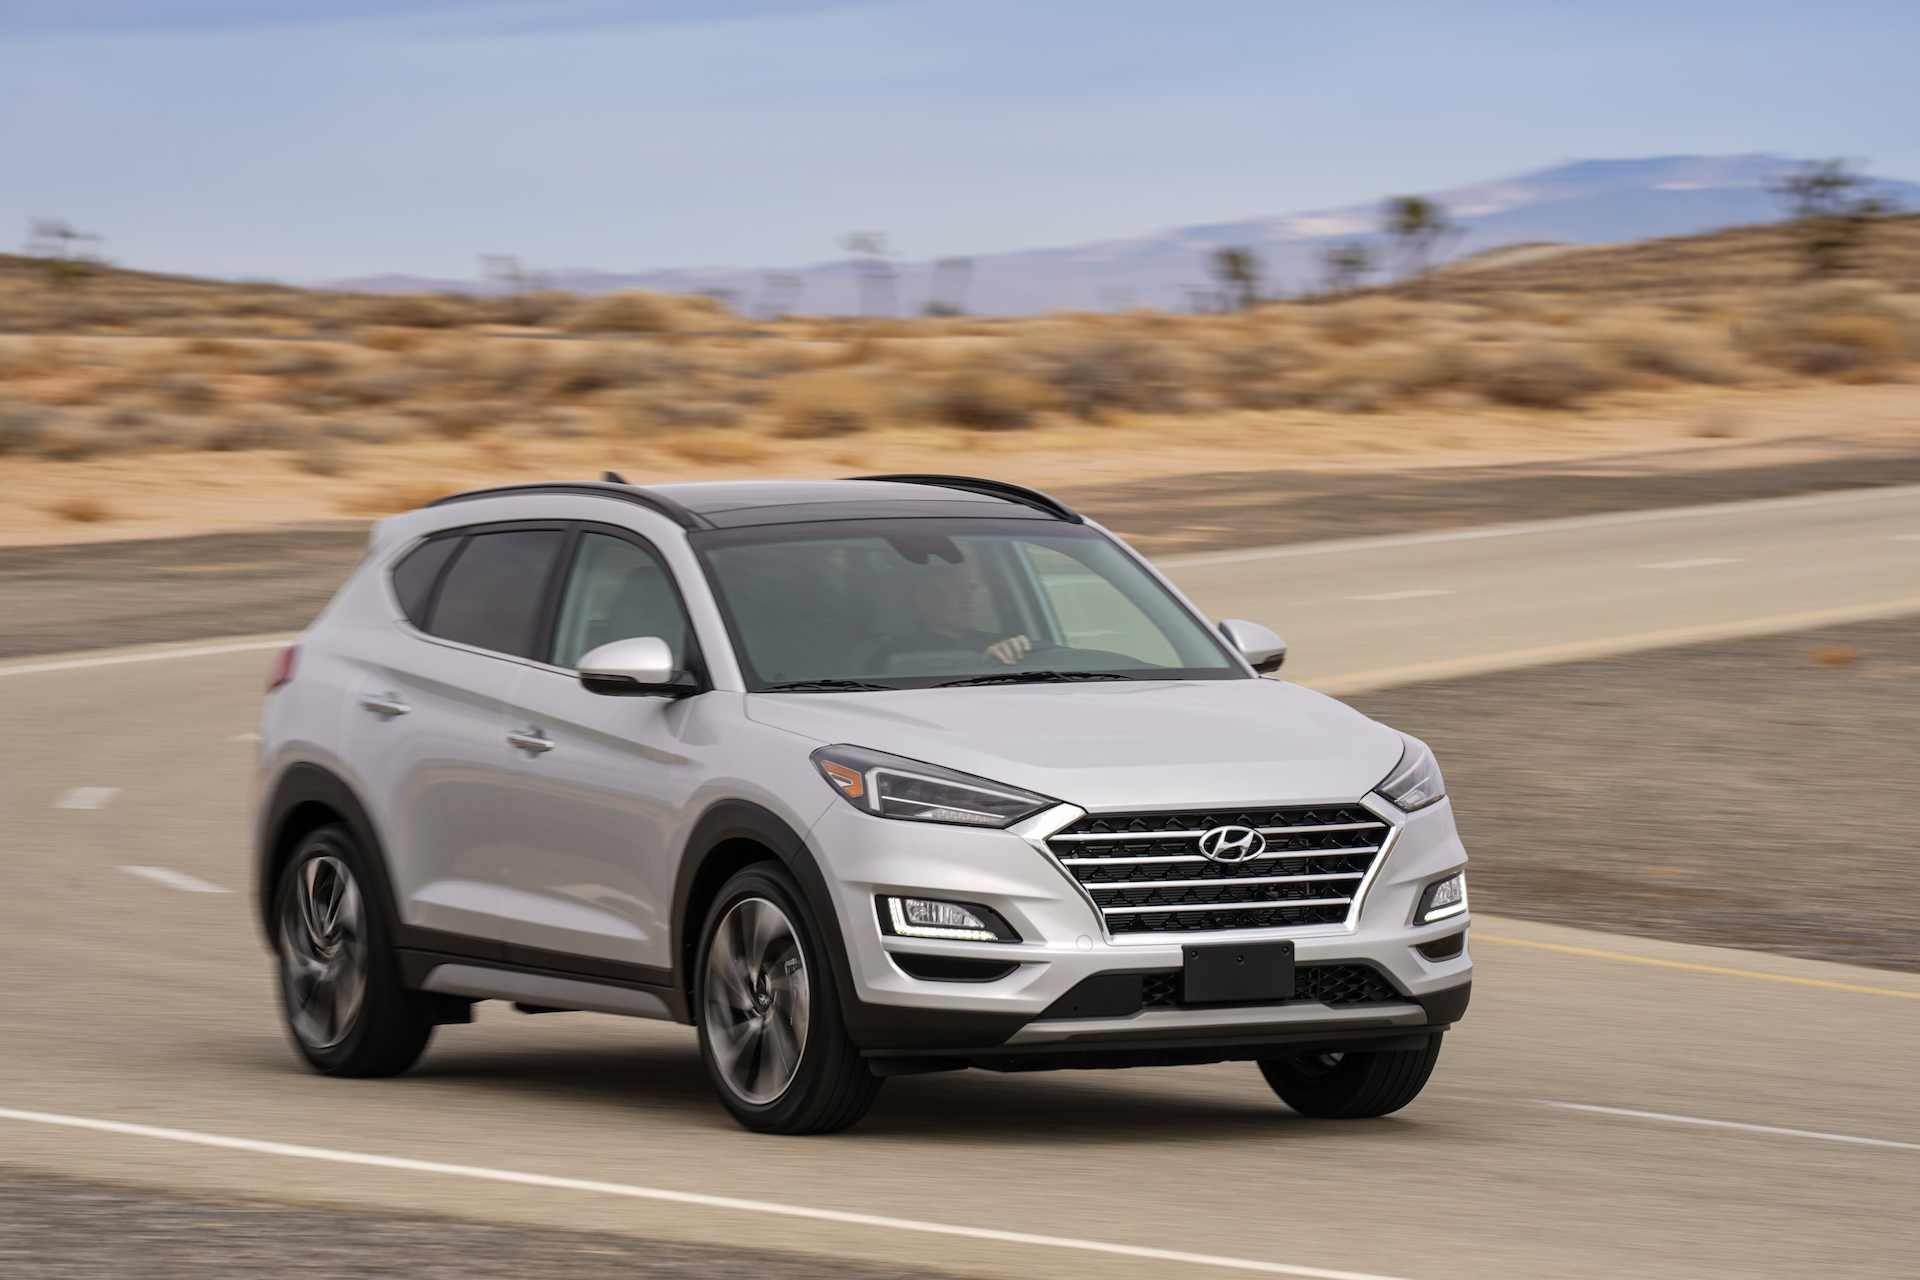 Best Of Tucson 2021 2021 Hyundai Tucson Review, Ratings, Specs, Prices, and Photos 